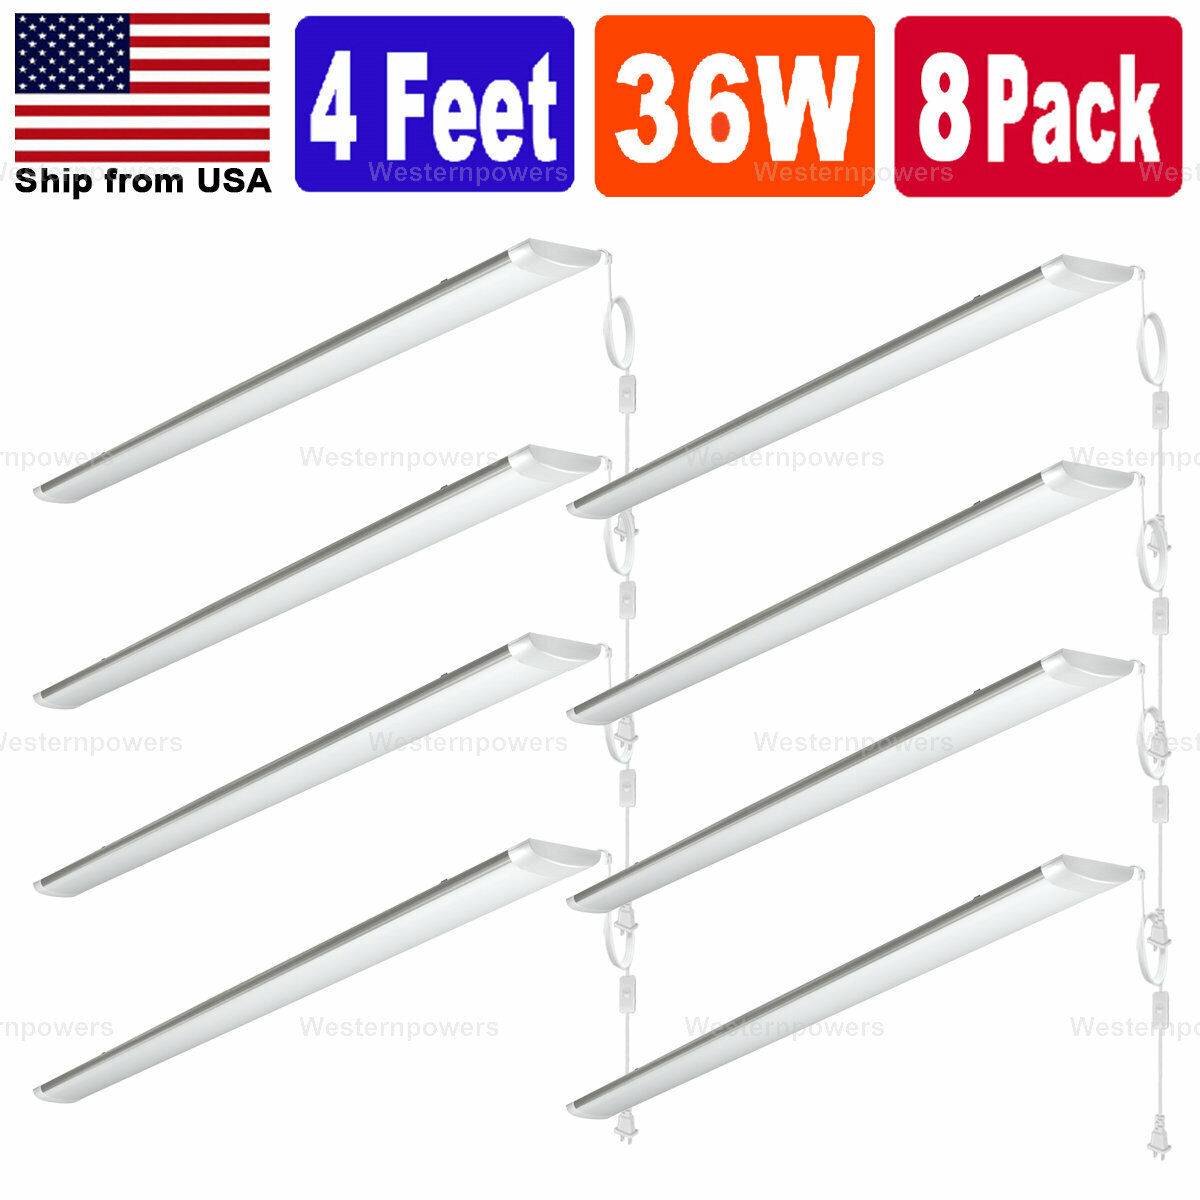 8 Pack LED Shop Light Utility Ceiling Garage Workshop surface Mount LED 36W westernpowers Does Not Apply